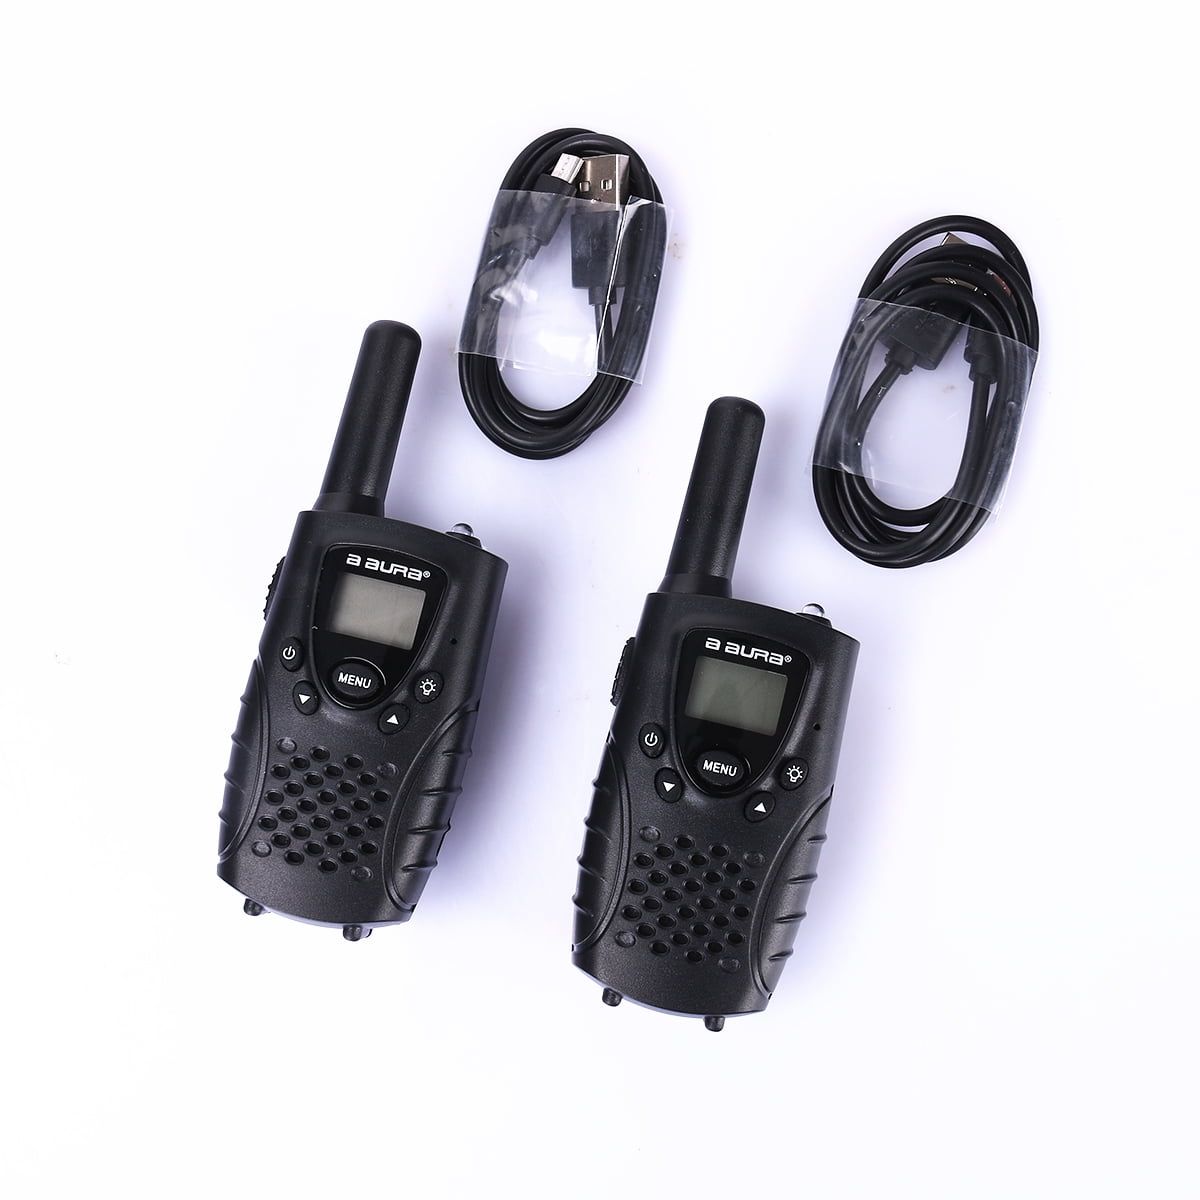 Retevis Walkie Talkies VOX CTCSS/DCS 22 CH FRS&Binocular For Kids Gifts/Toy New 